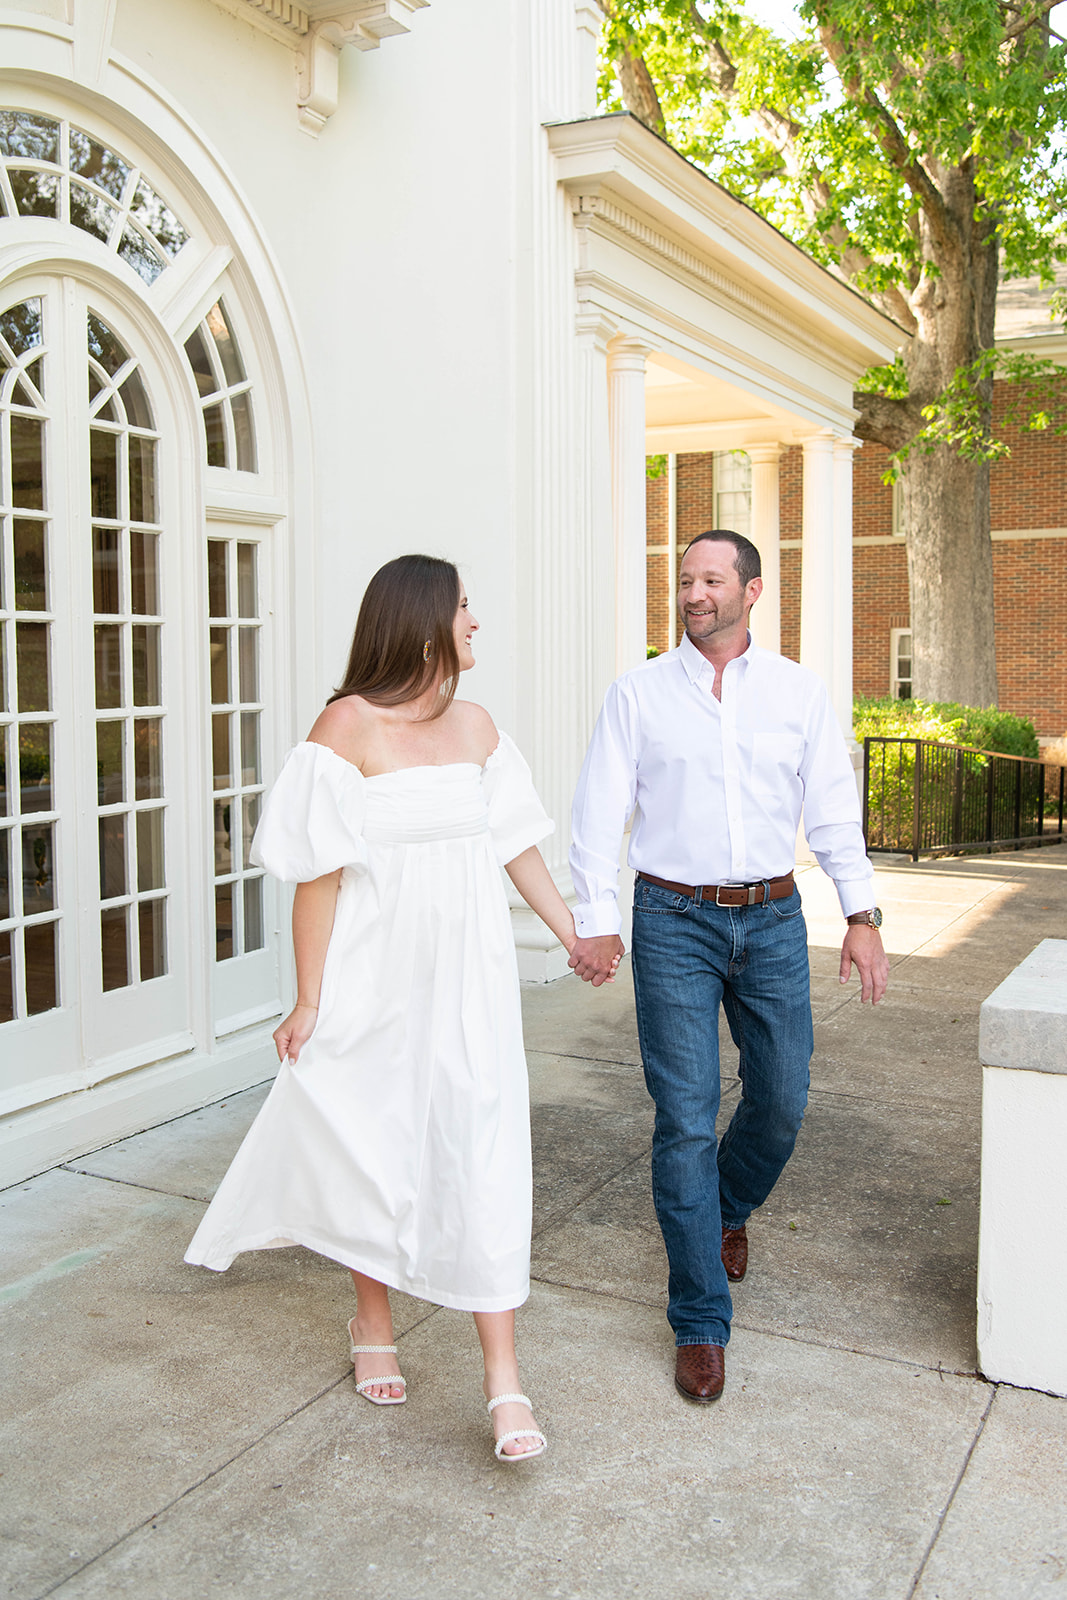 Bride to be wears a white off the shoulder dress and groom to be wears a white button up shirt and blue jeans